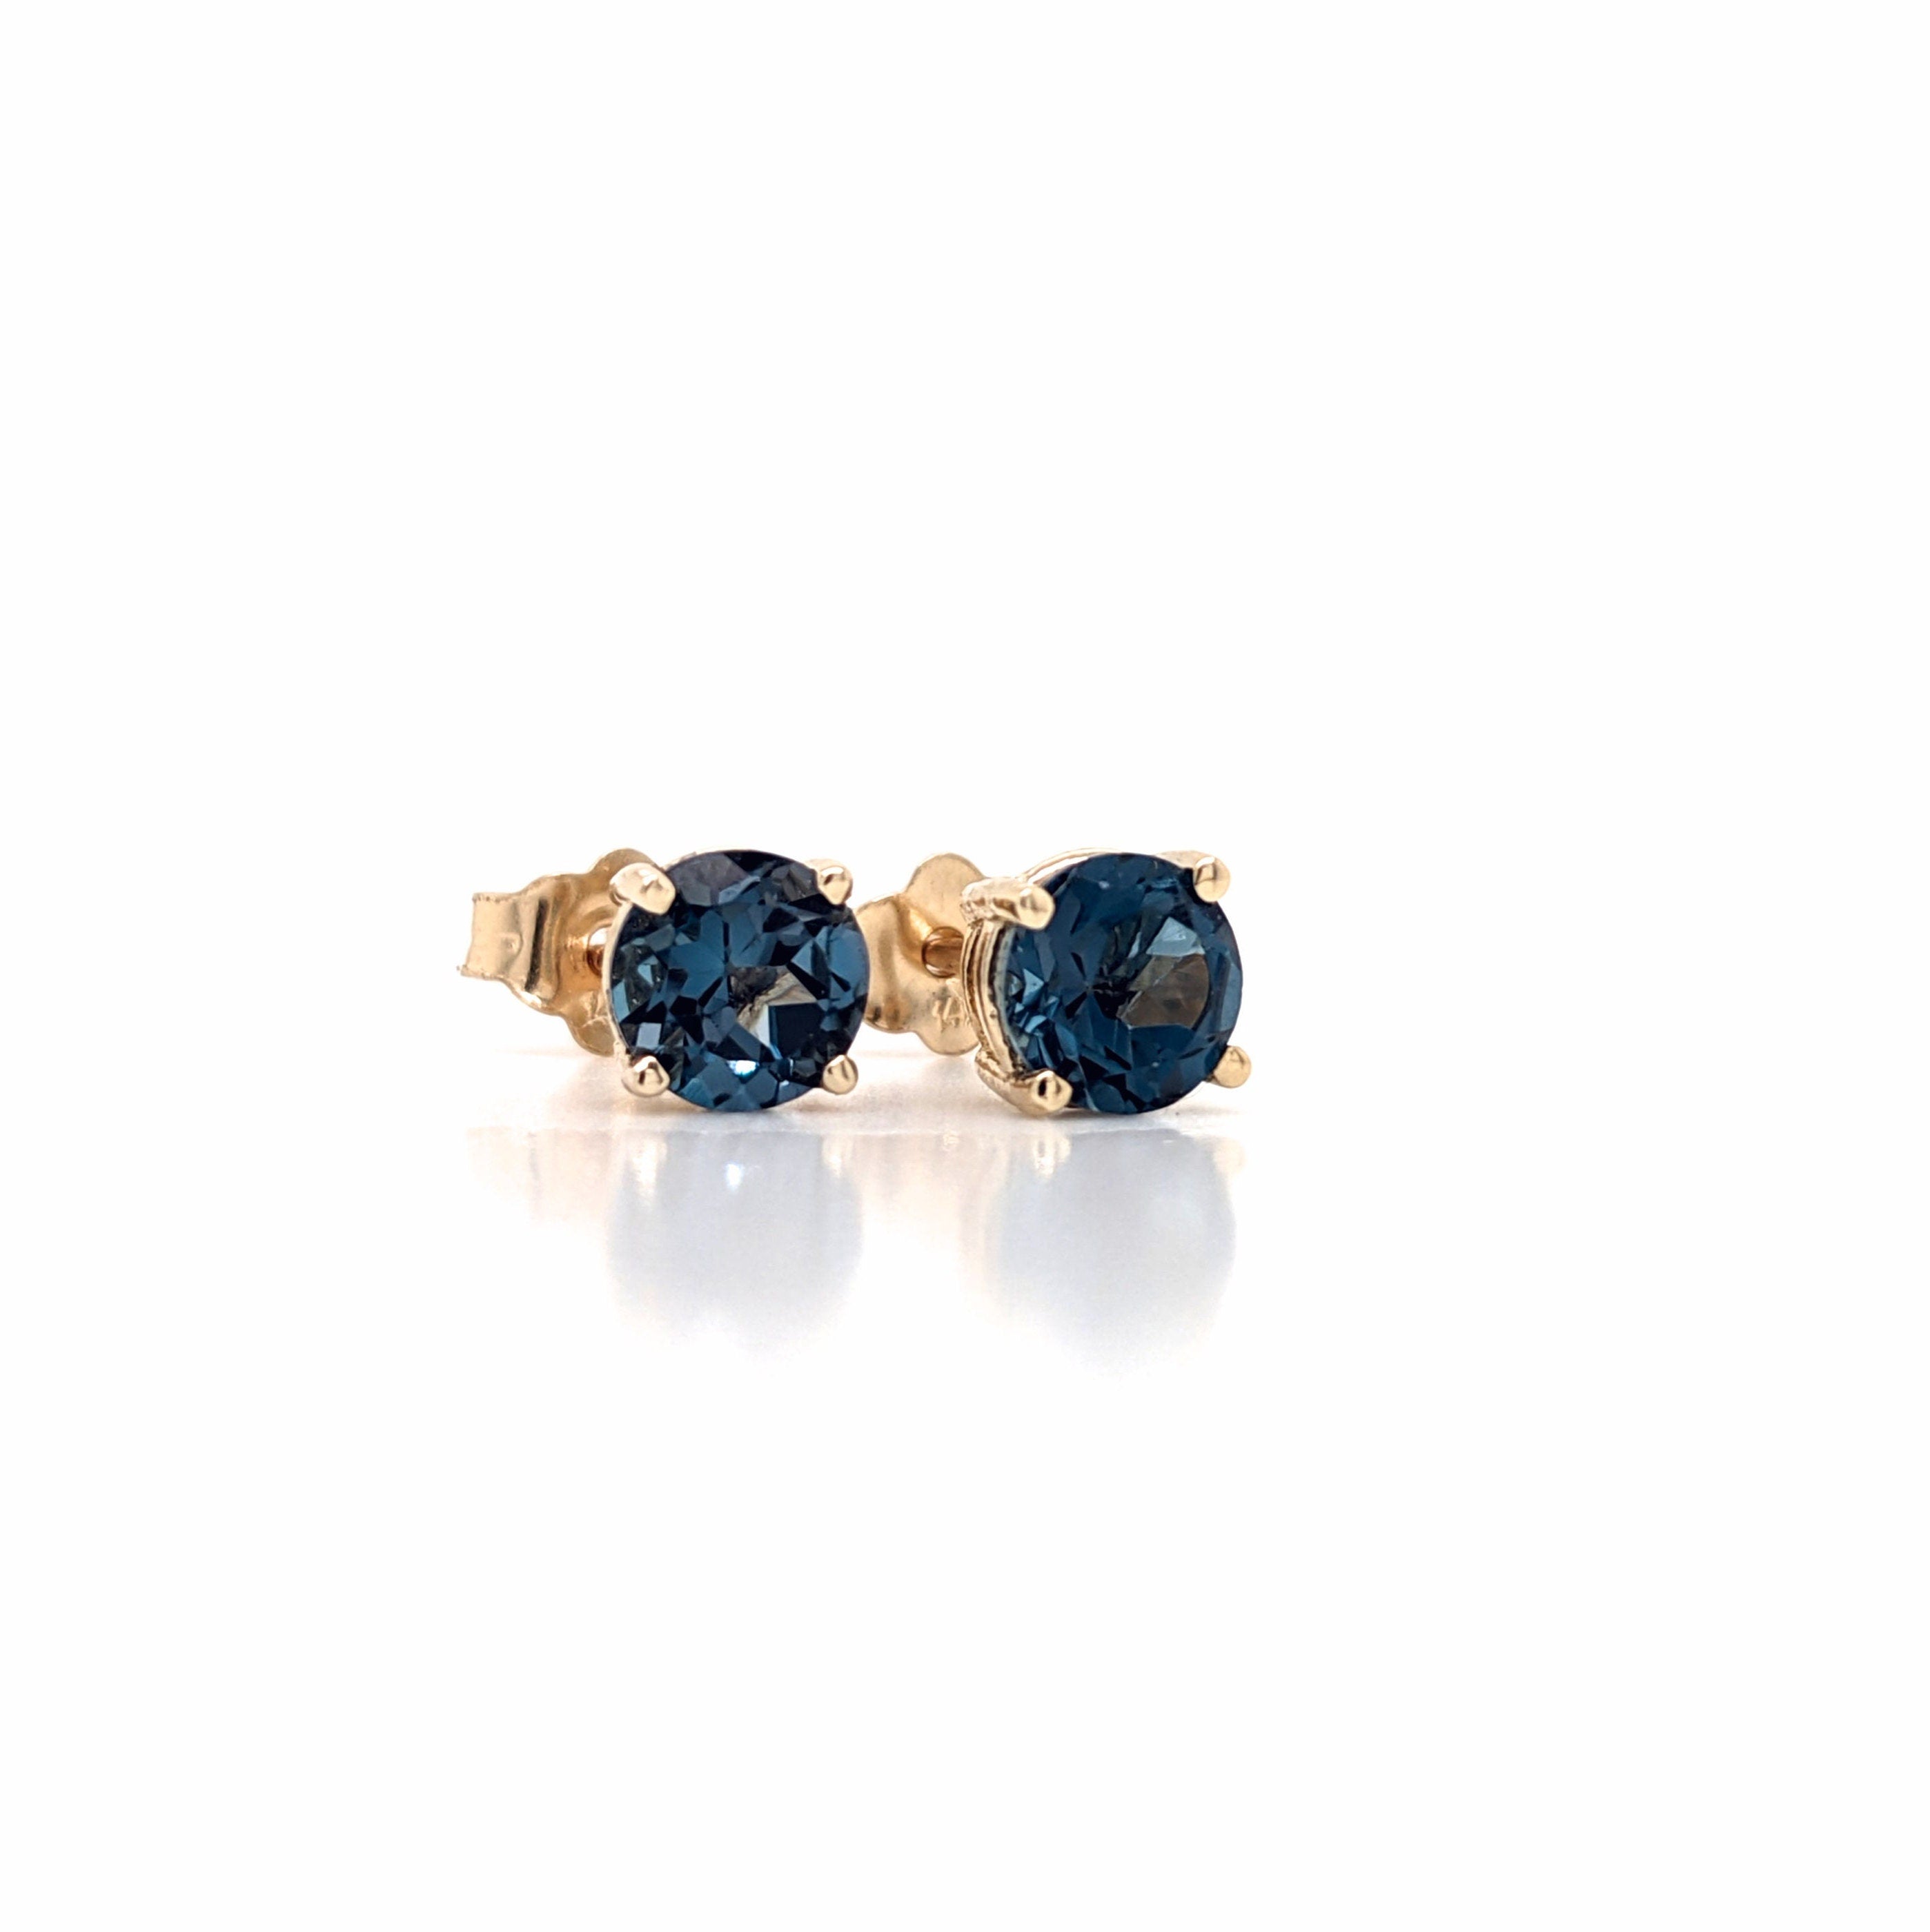 London Blue Topaz Studs in 14k Solid White, Yellow or Rose Gold | Round 4mm 5mm Solitaire Earrings | December Birthstone | Gemstone Earrings